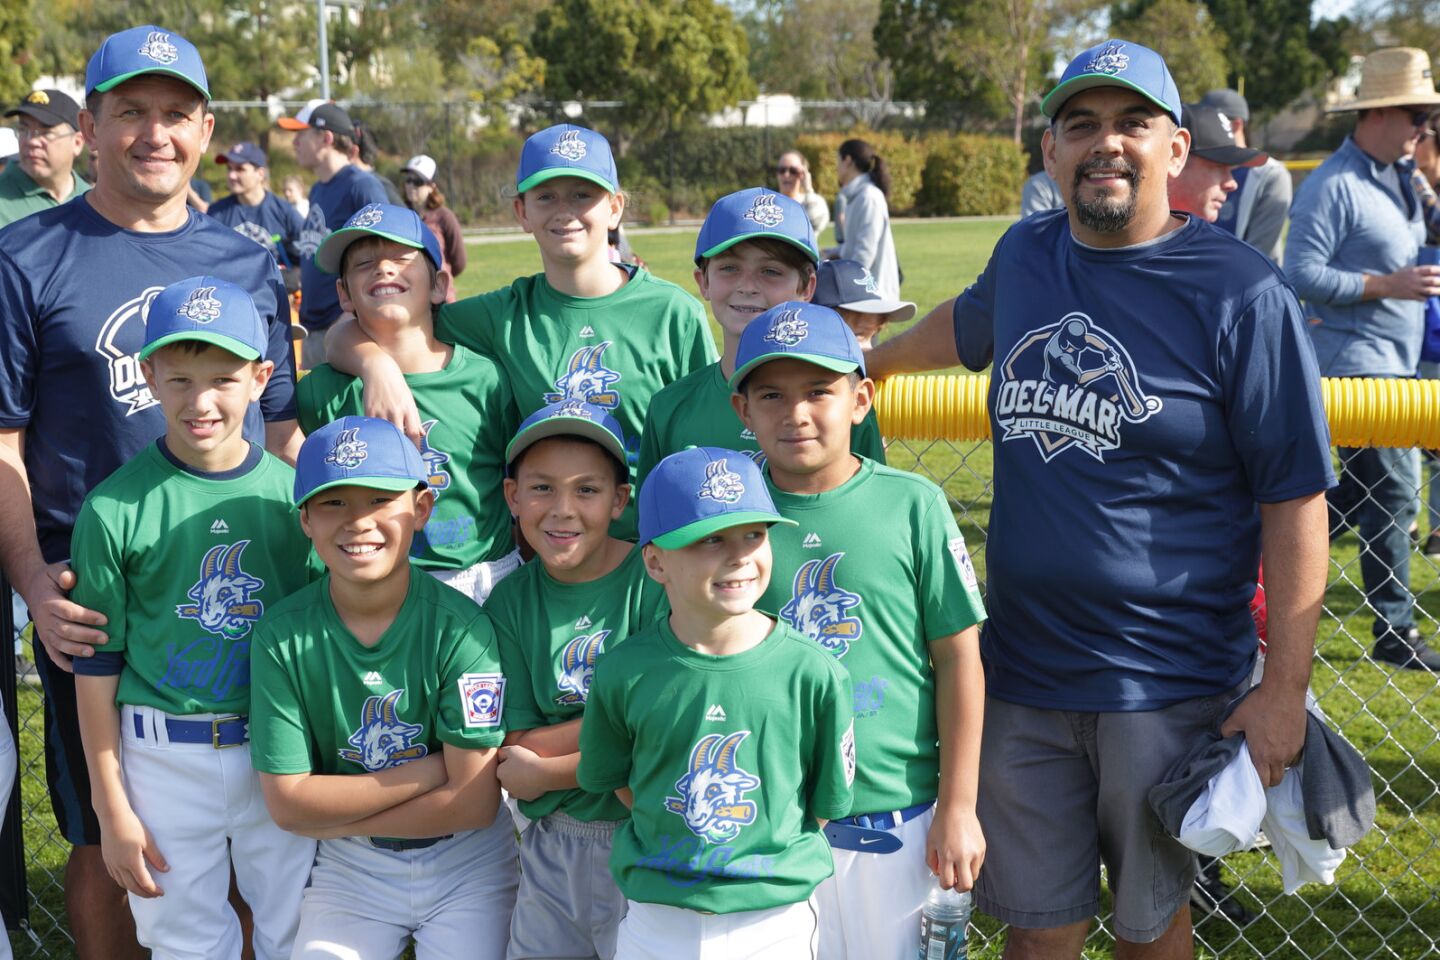 Yard Goats at the Del Mar Little League Opening Day